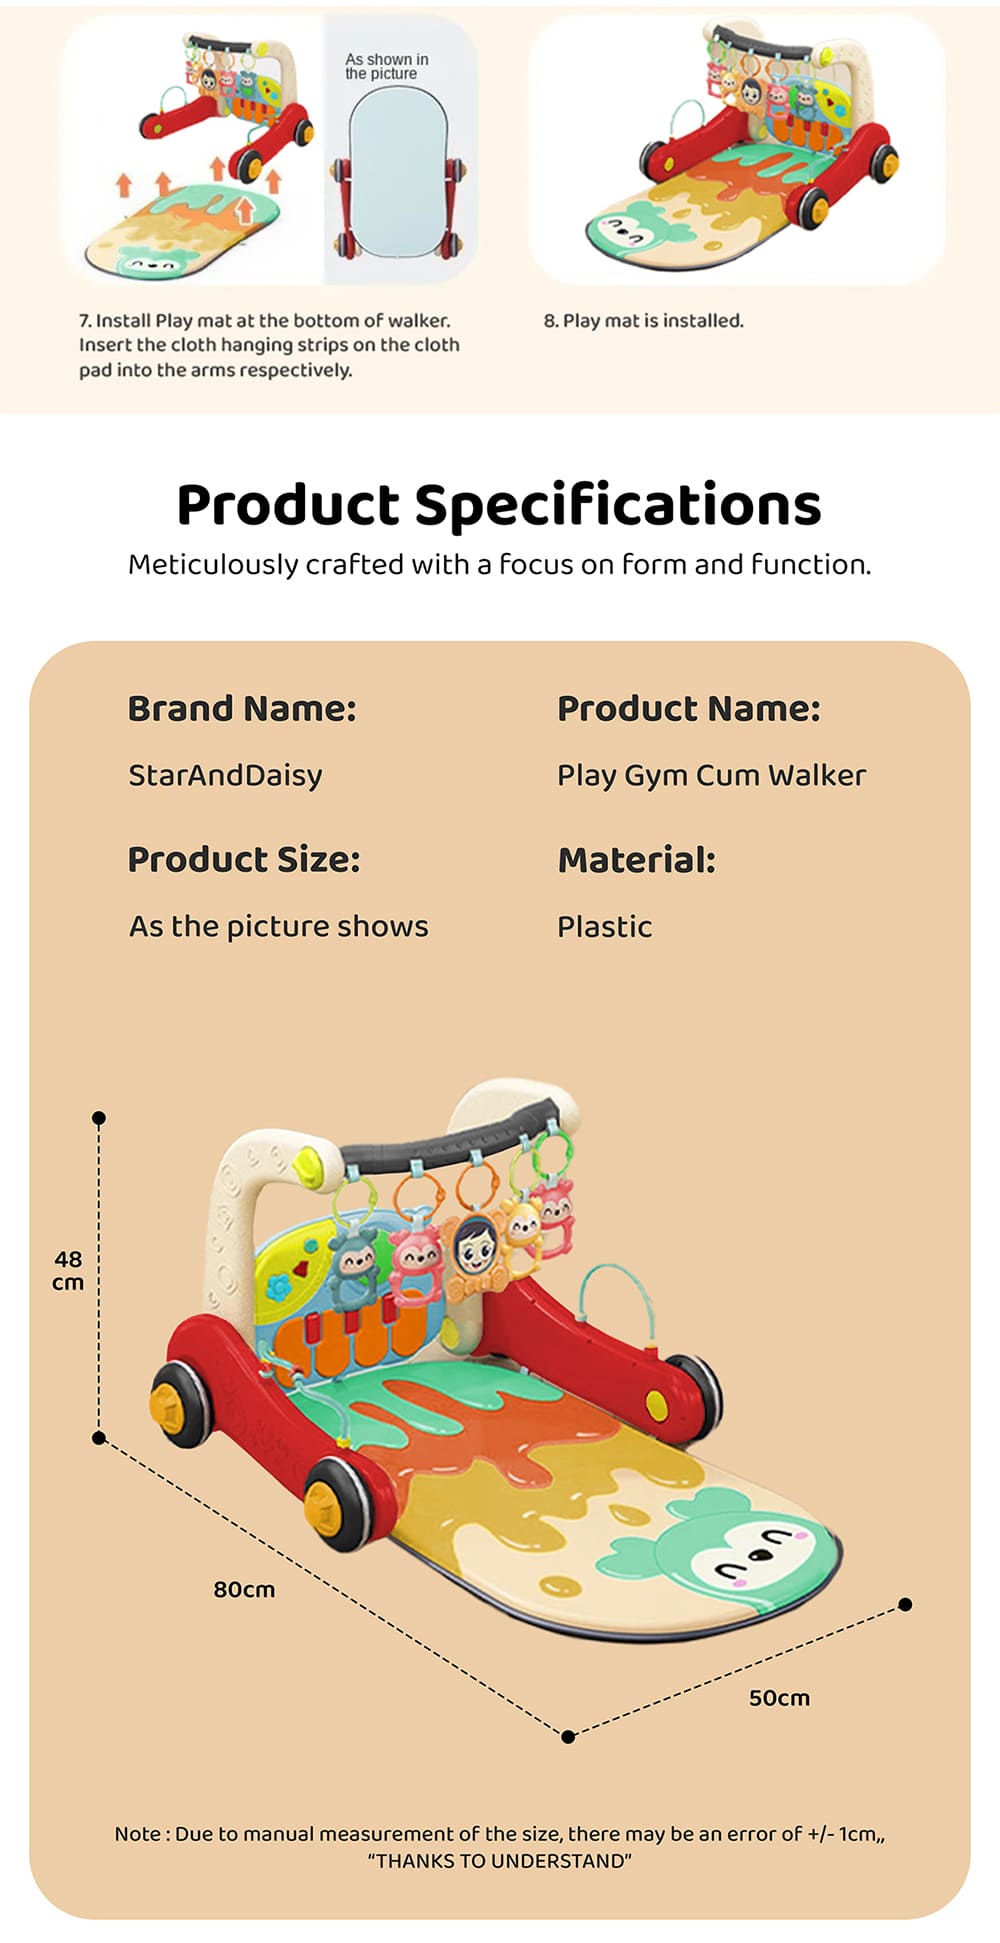 Specification of Baby Play Gym Cum Walker